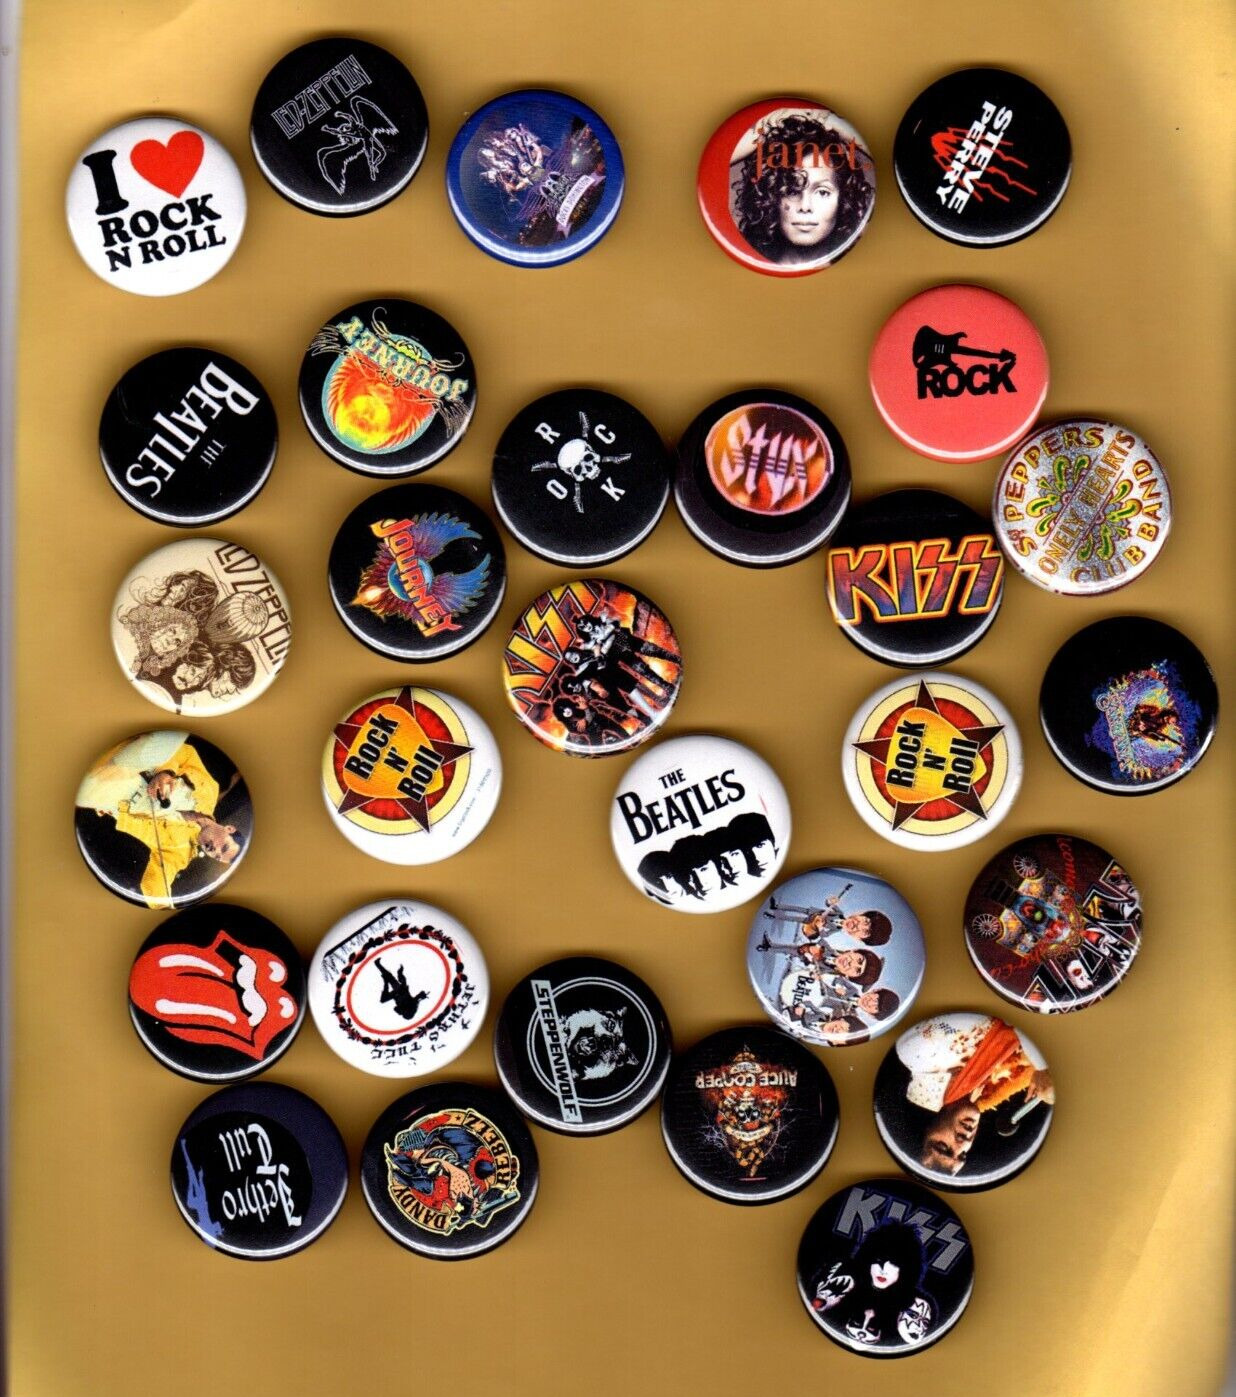 ROCK AND ROLL LOGO  26 ASSORTED   1.25” Button Set  LOT Of  26  Pins  Pinbacks